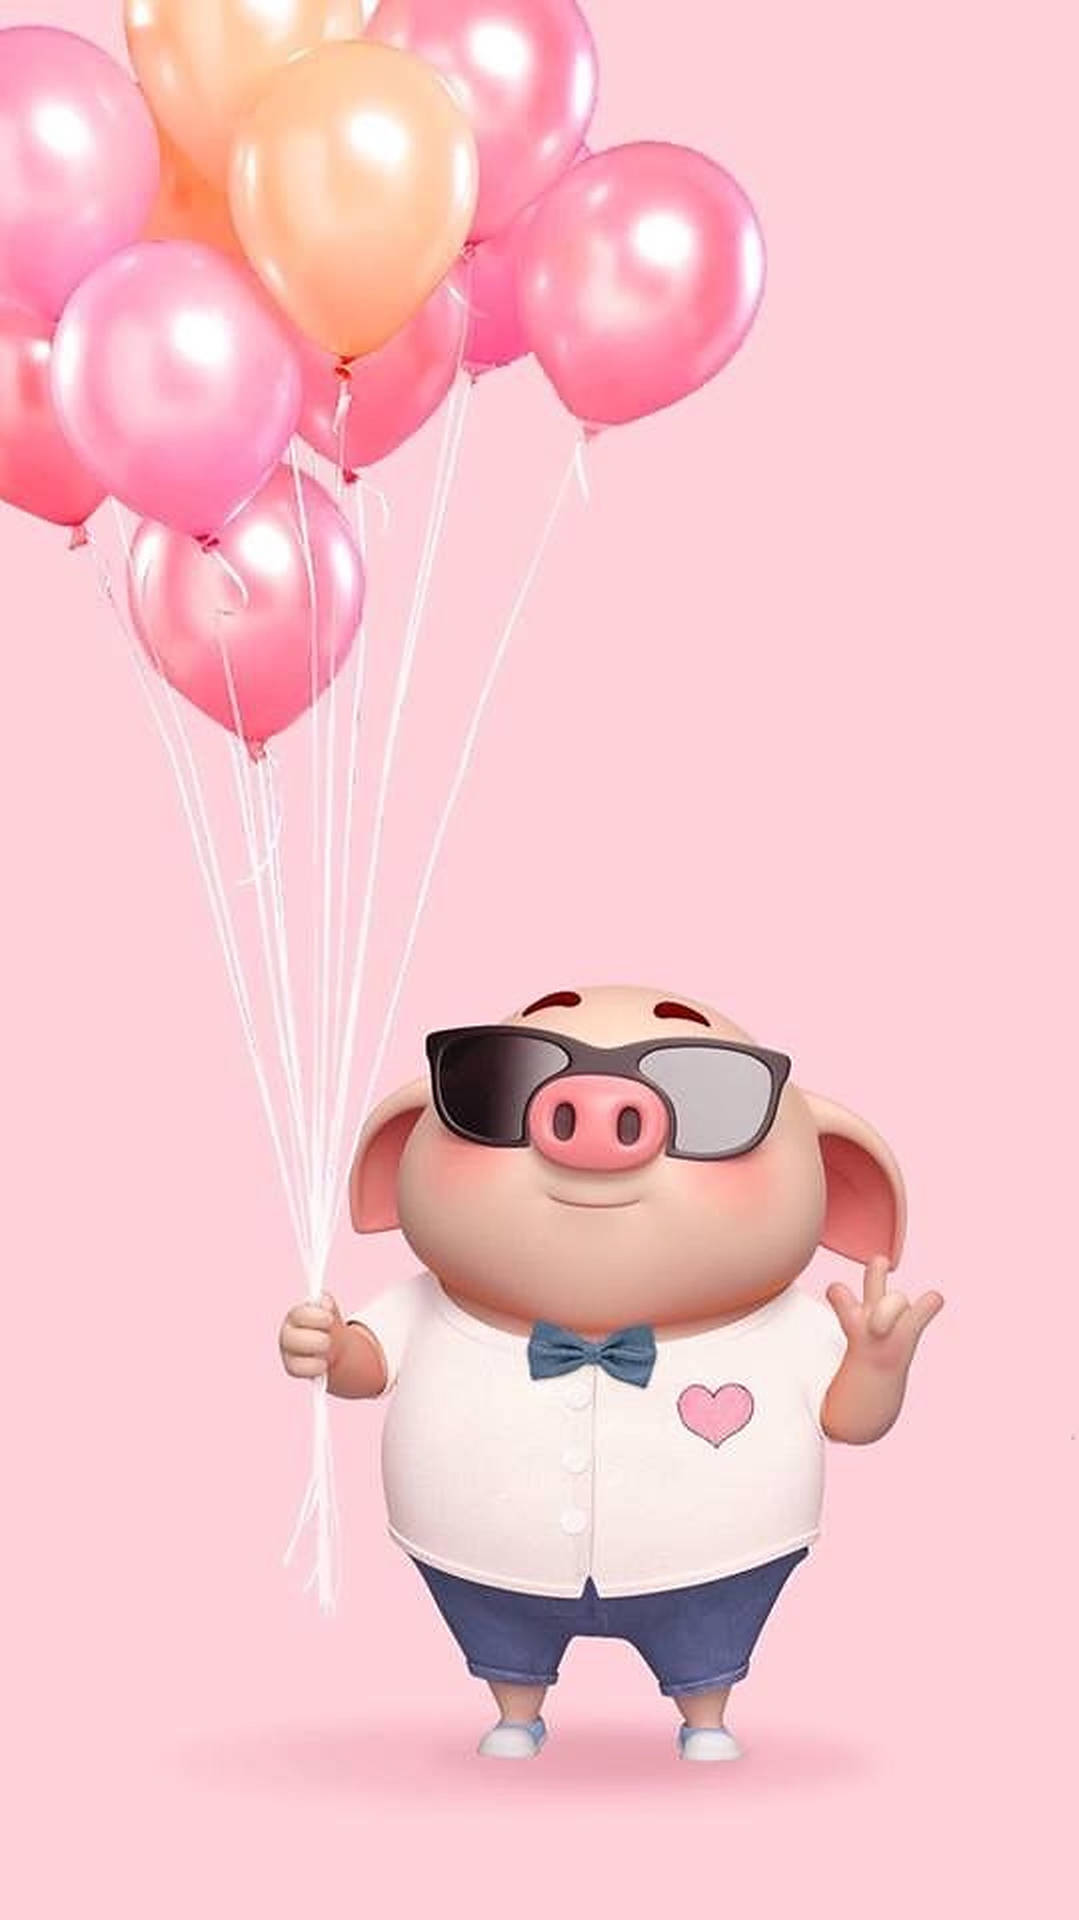 Cute Pig With Balloons